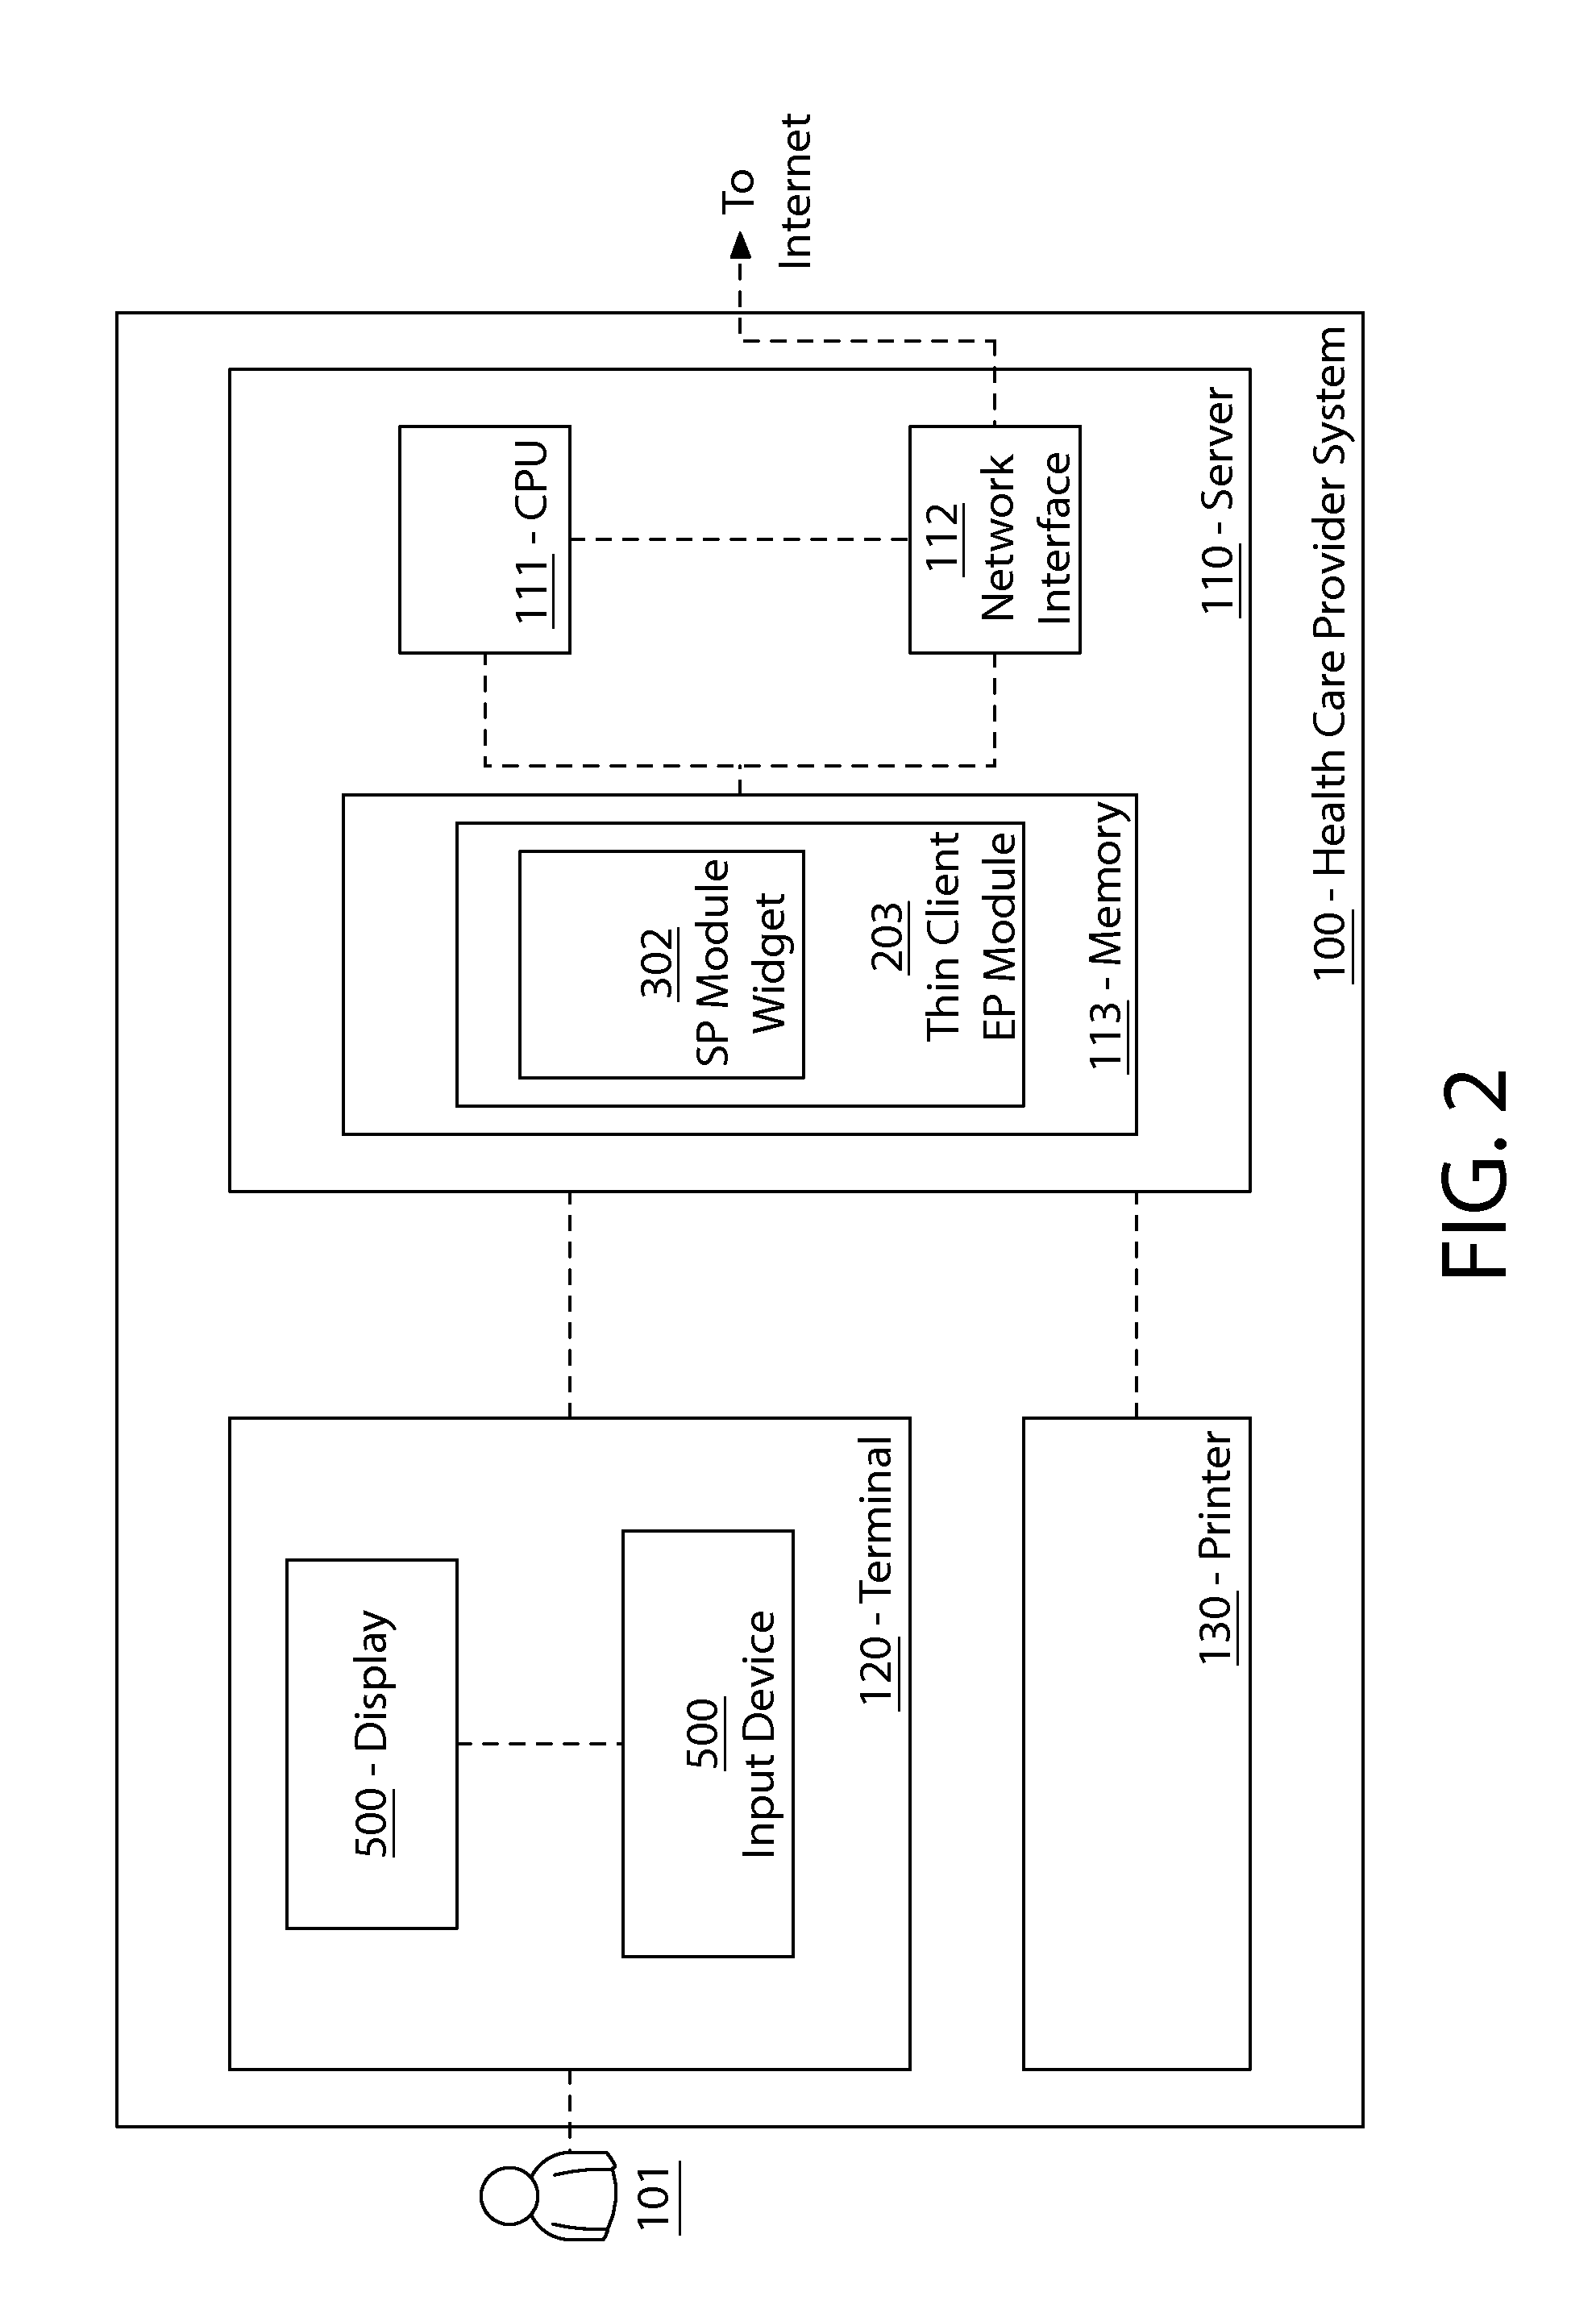 System and method for increasing patient adherence to medication treatment regimens